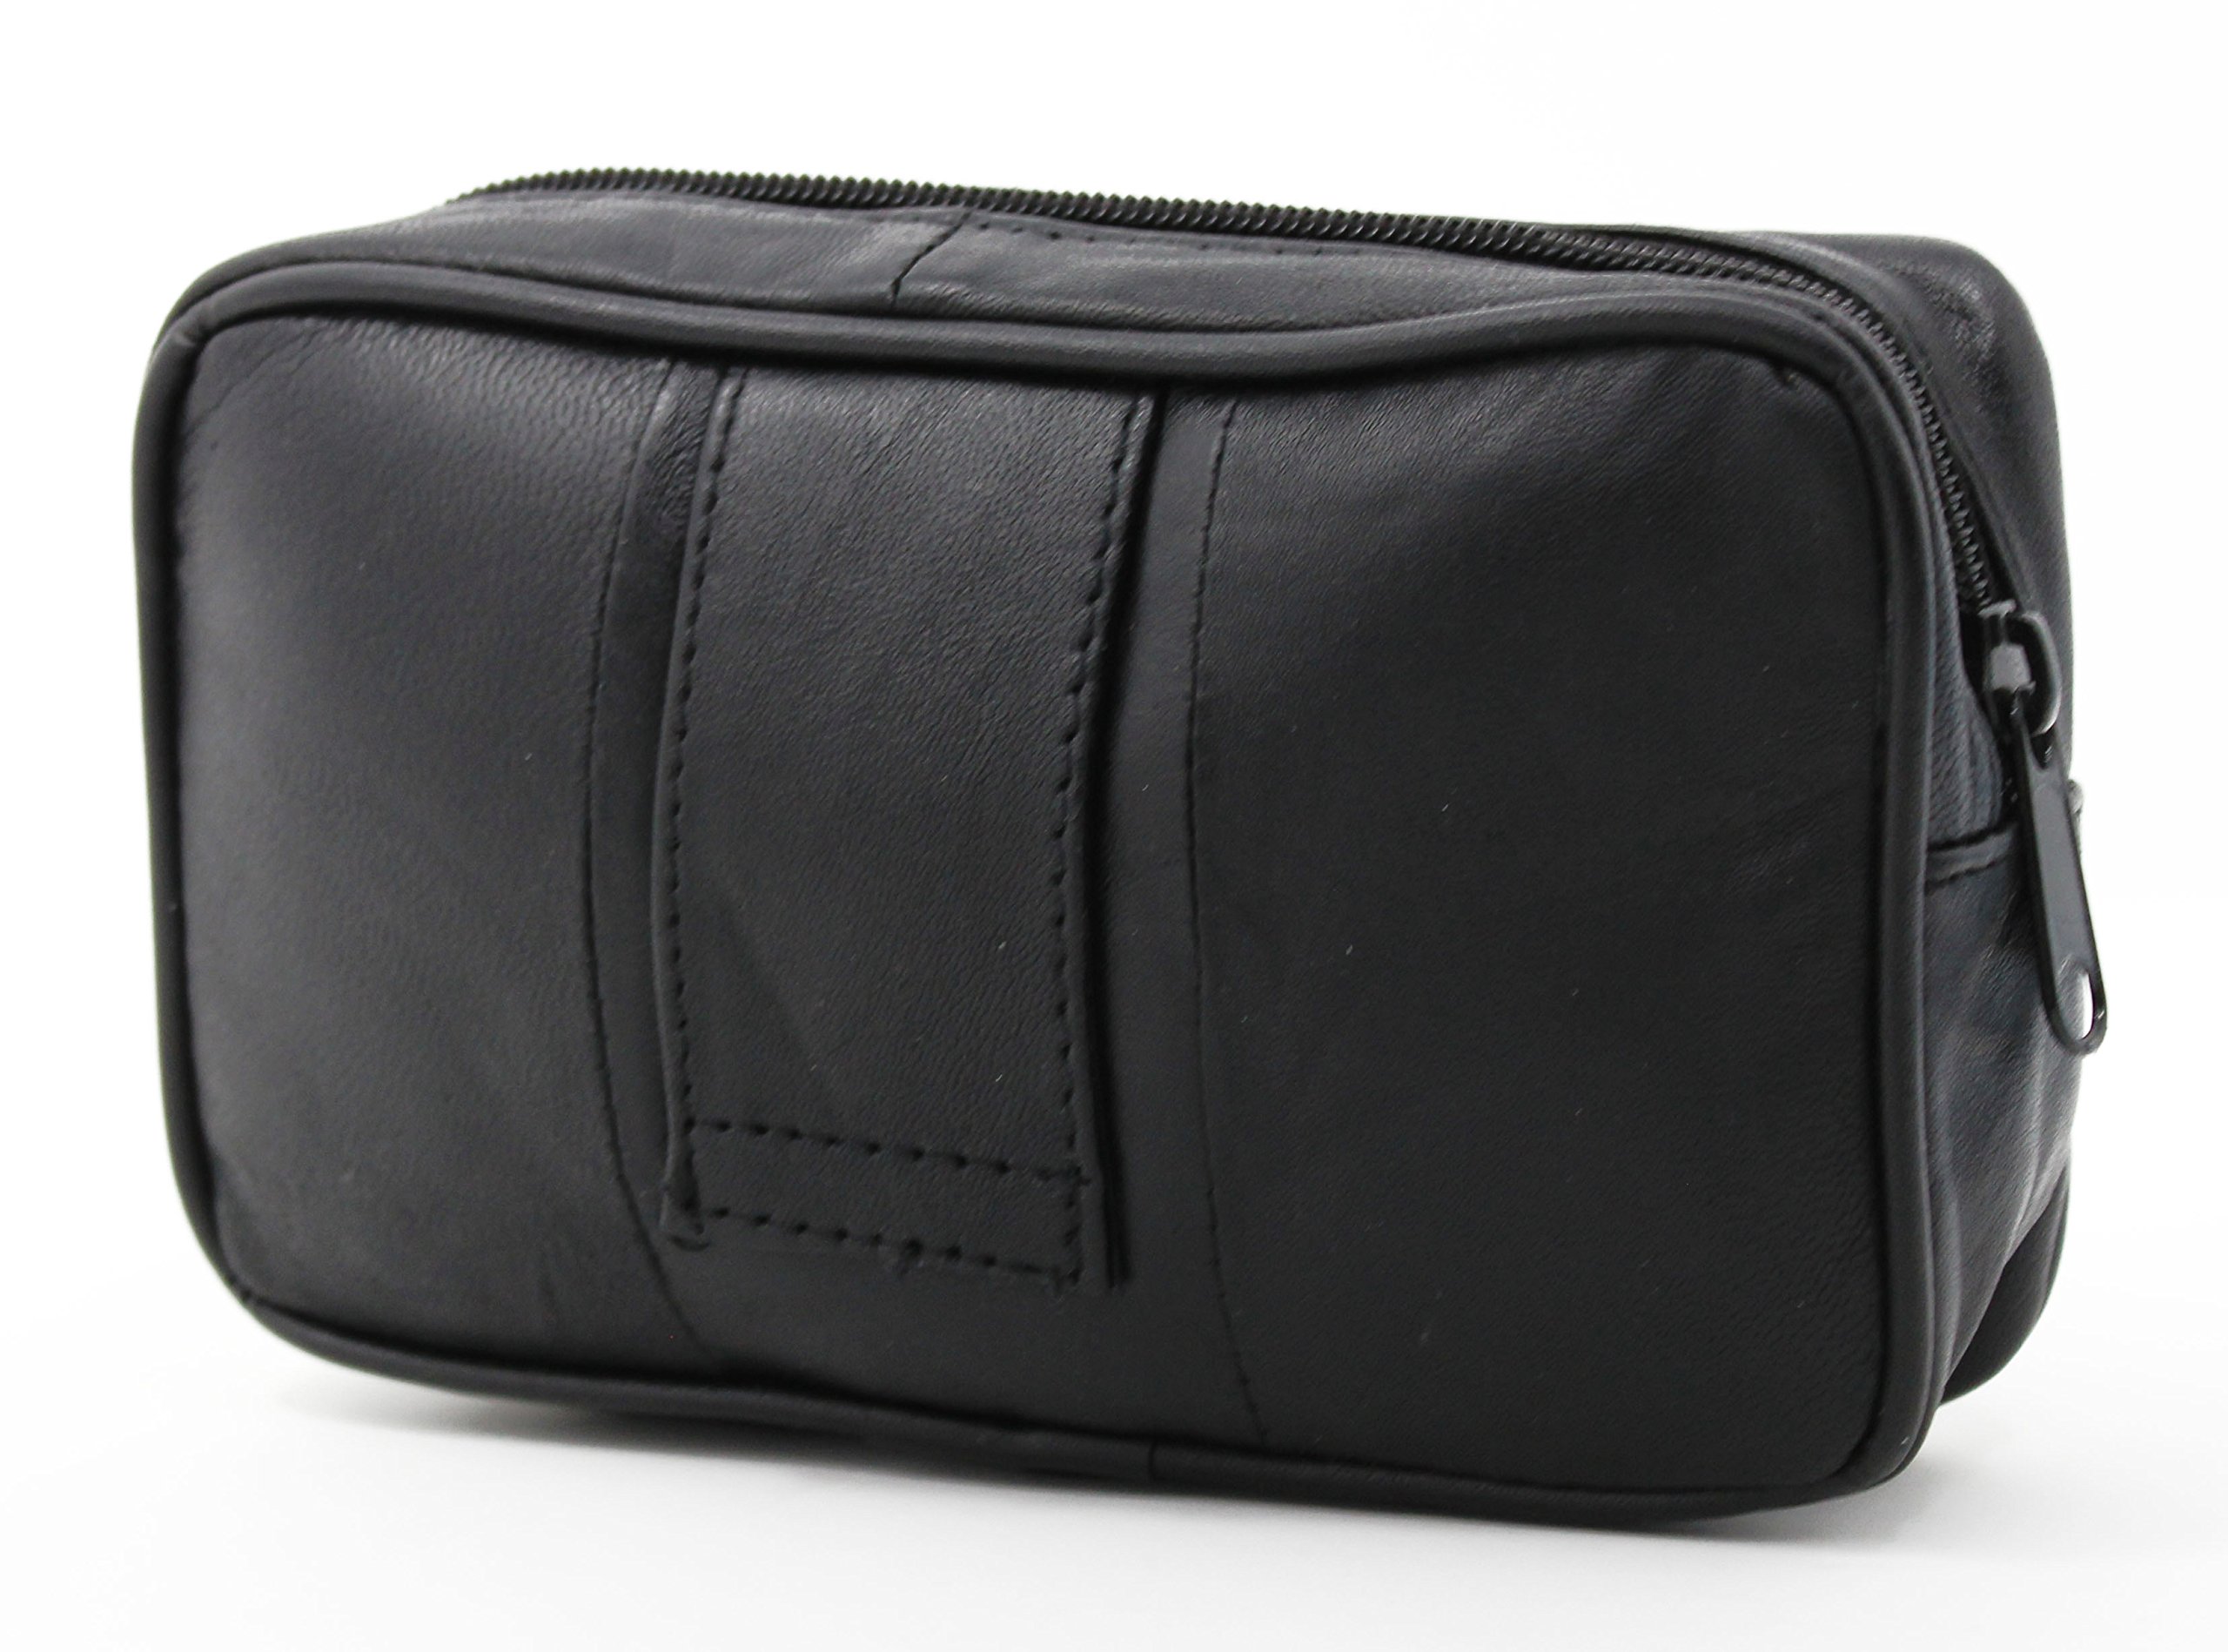 RAS WALLETS Men's Leather Waist Bag Coin Purse Pouch With Belt Loop 17 x 11 x 4.5 Black